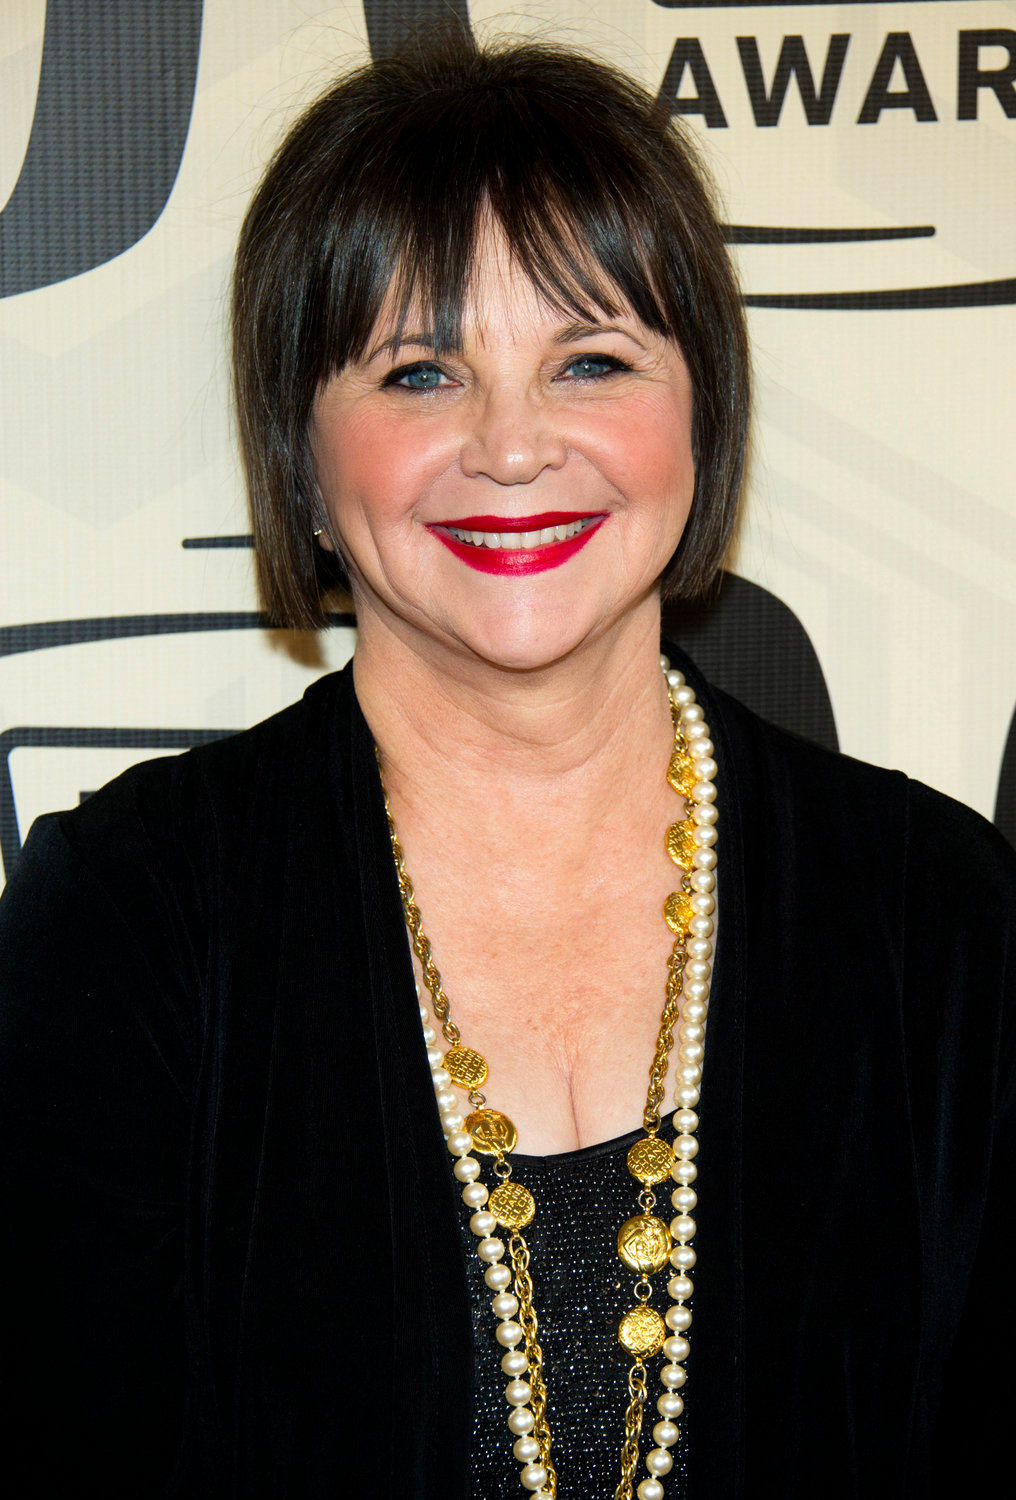 Cindy Williams arrives to the TV Land Awards 10th Anniversary in New York on April 14, 2012. Williams, who was among the most recognizable stars in America in the 1970s and 1980s for her role as Shirley opposite Penny Marshall's Laverne on the beloved sitcom "Laverne & Shirley," died Wednesday, Jan. 25, 2023, in Los Angeles at age 75, after a brief illness, her family said Monday, Jan. 30.